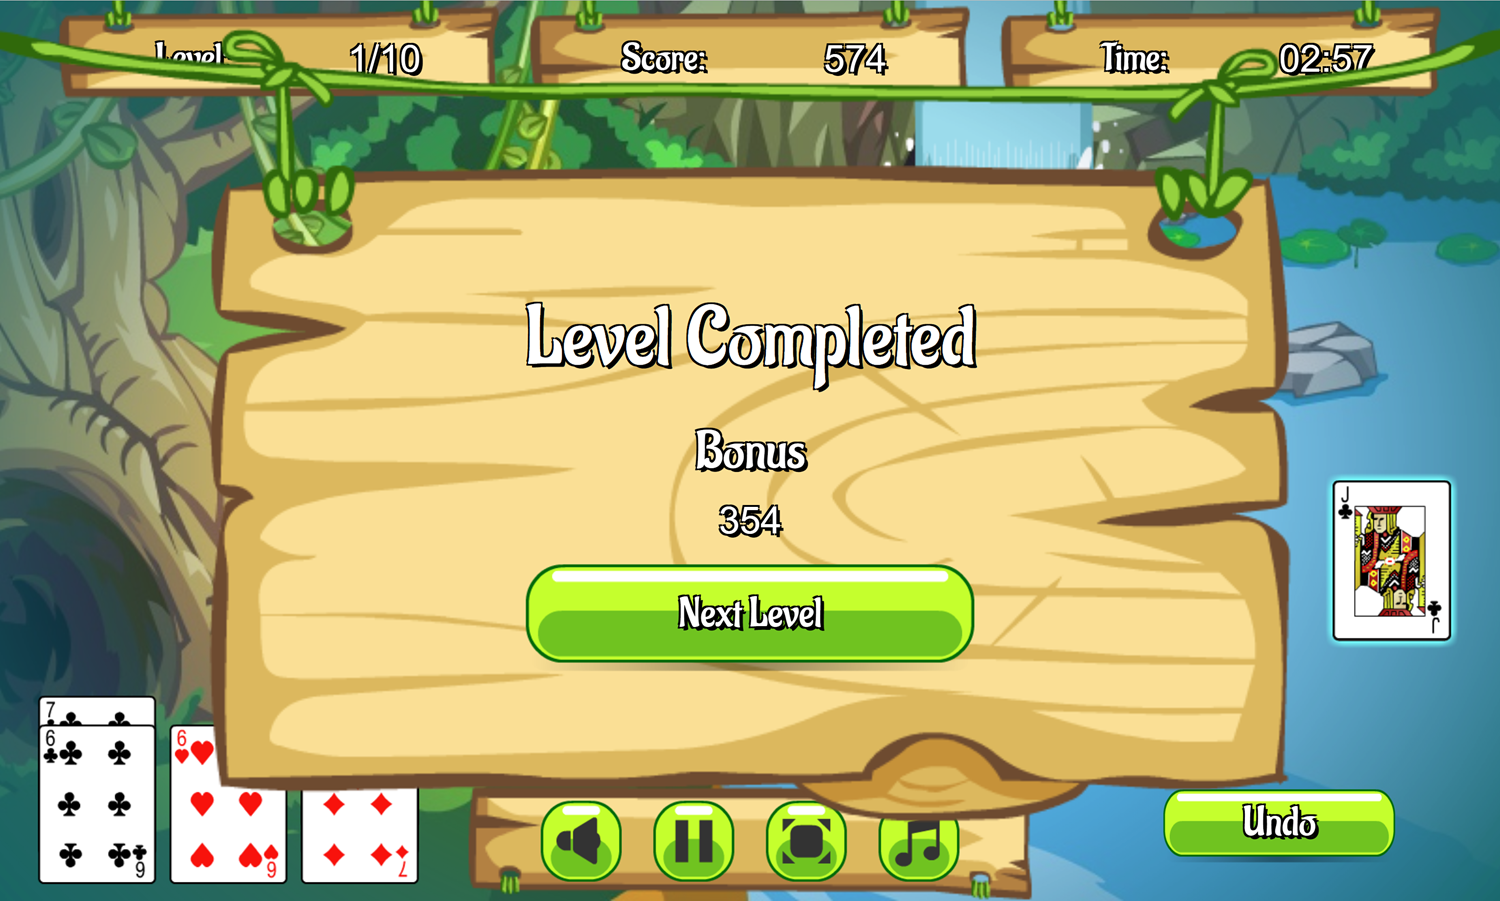 Jungle Solitaire Game Level Completed Screen Screenshot.